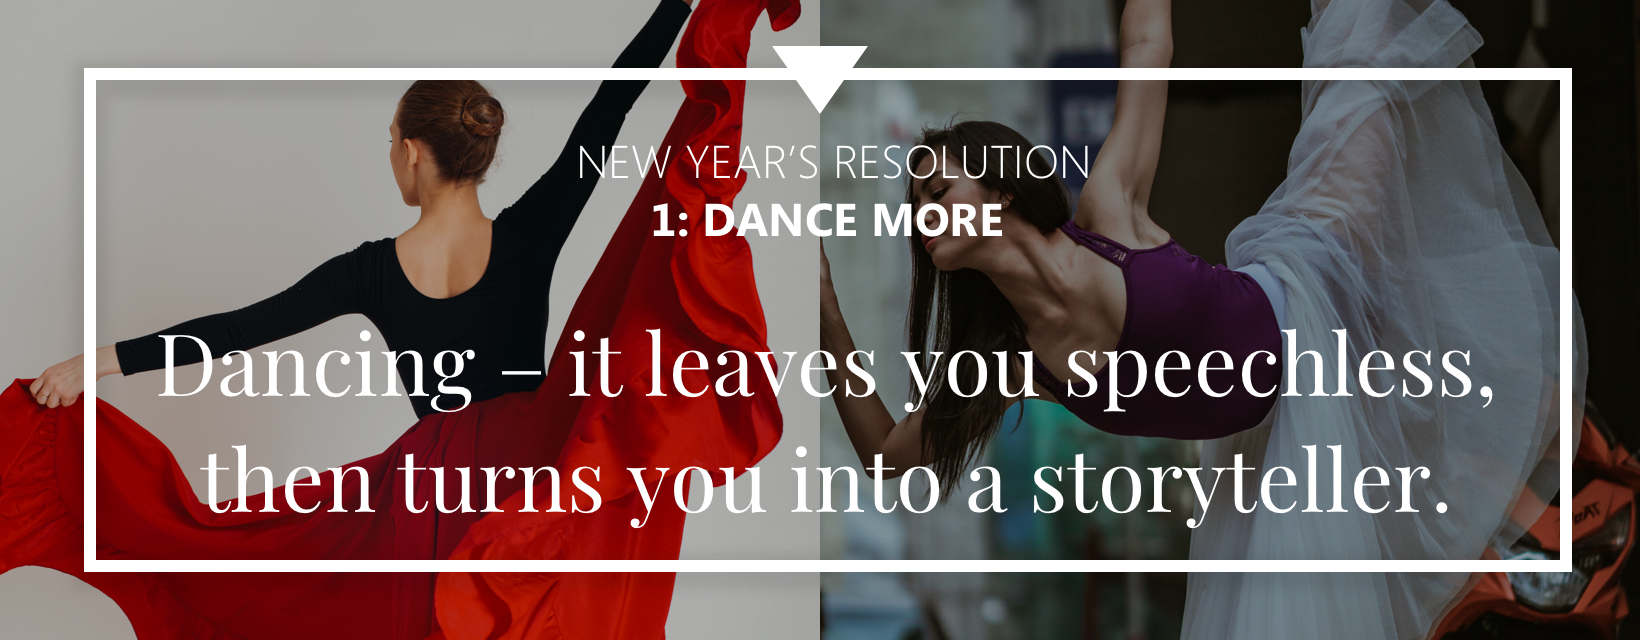 New Year's Resolutions for dancers - Dance More